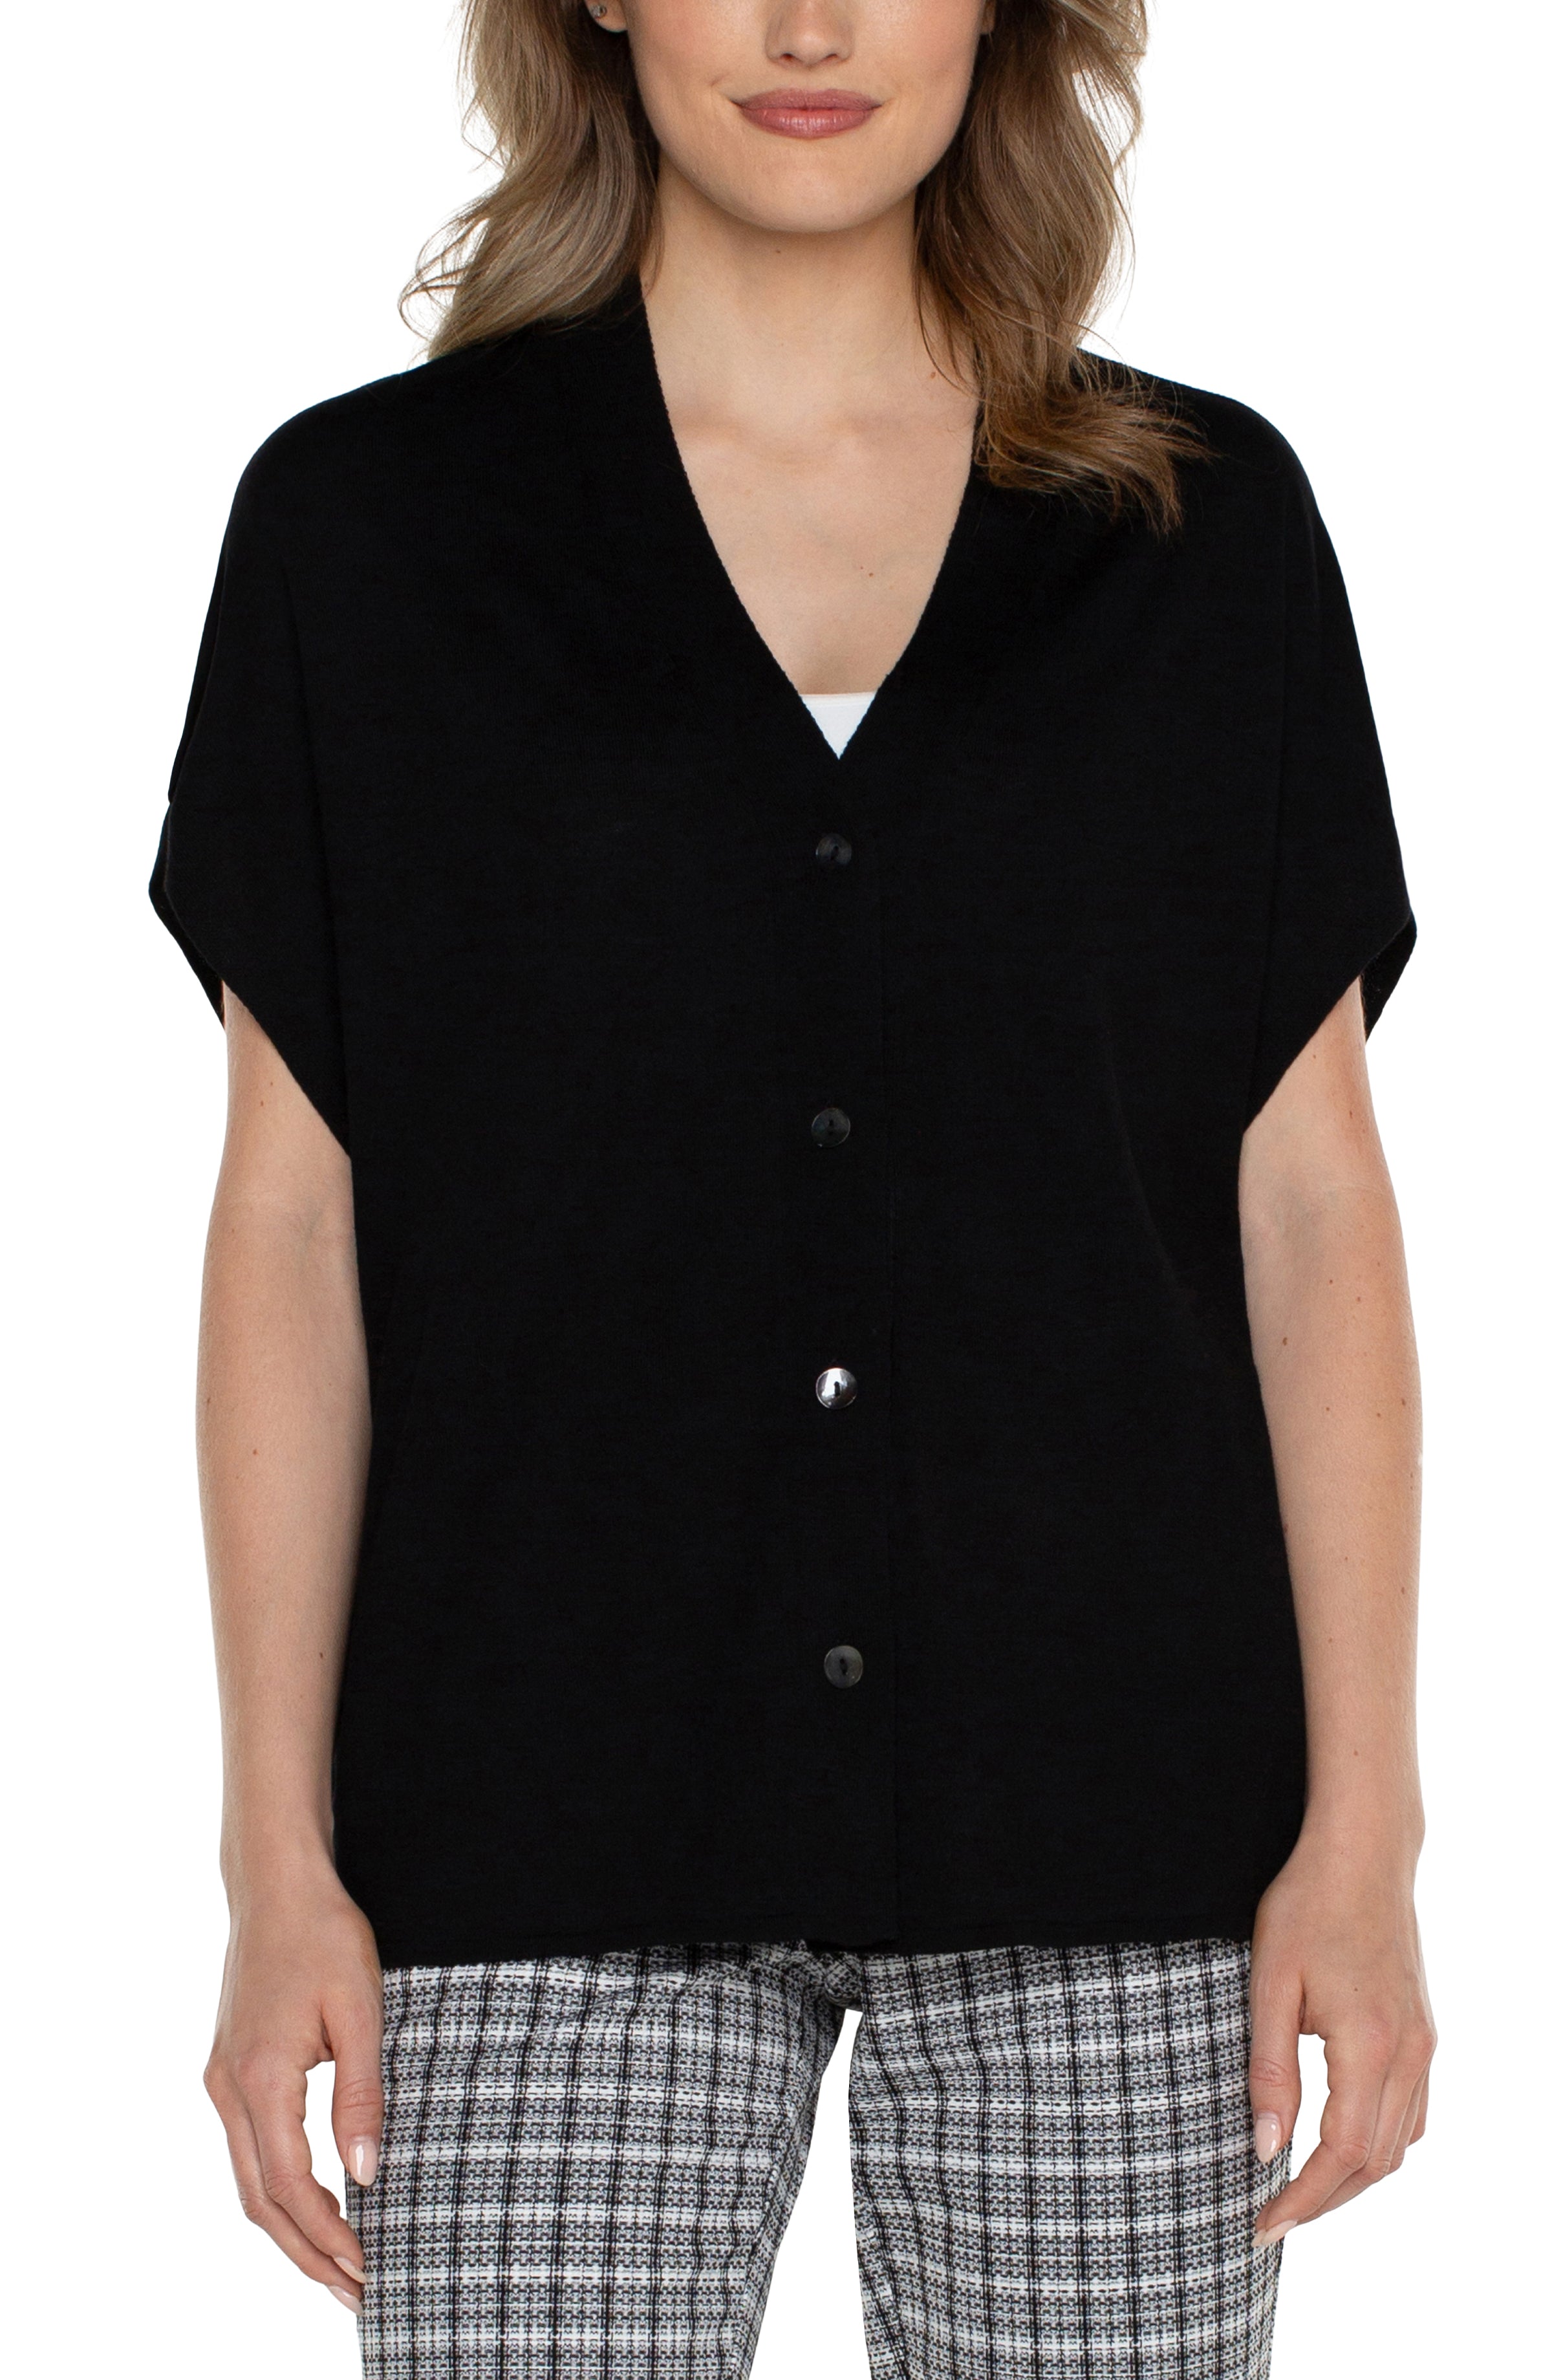 Button Front Dolman Cardigan Sweater-Liverpool